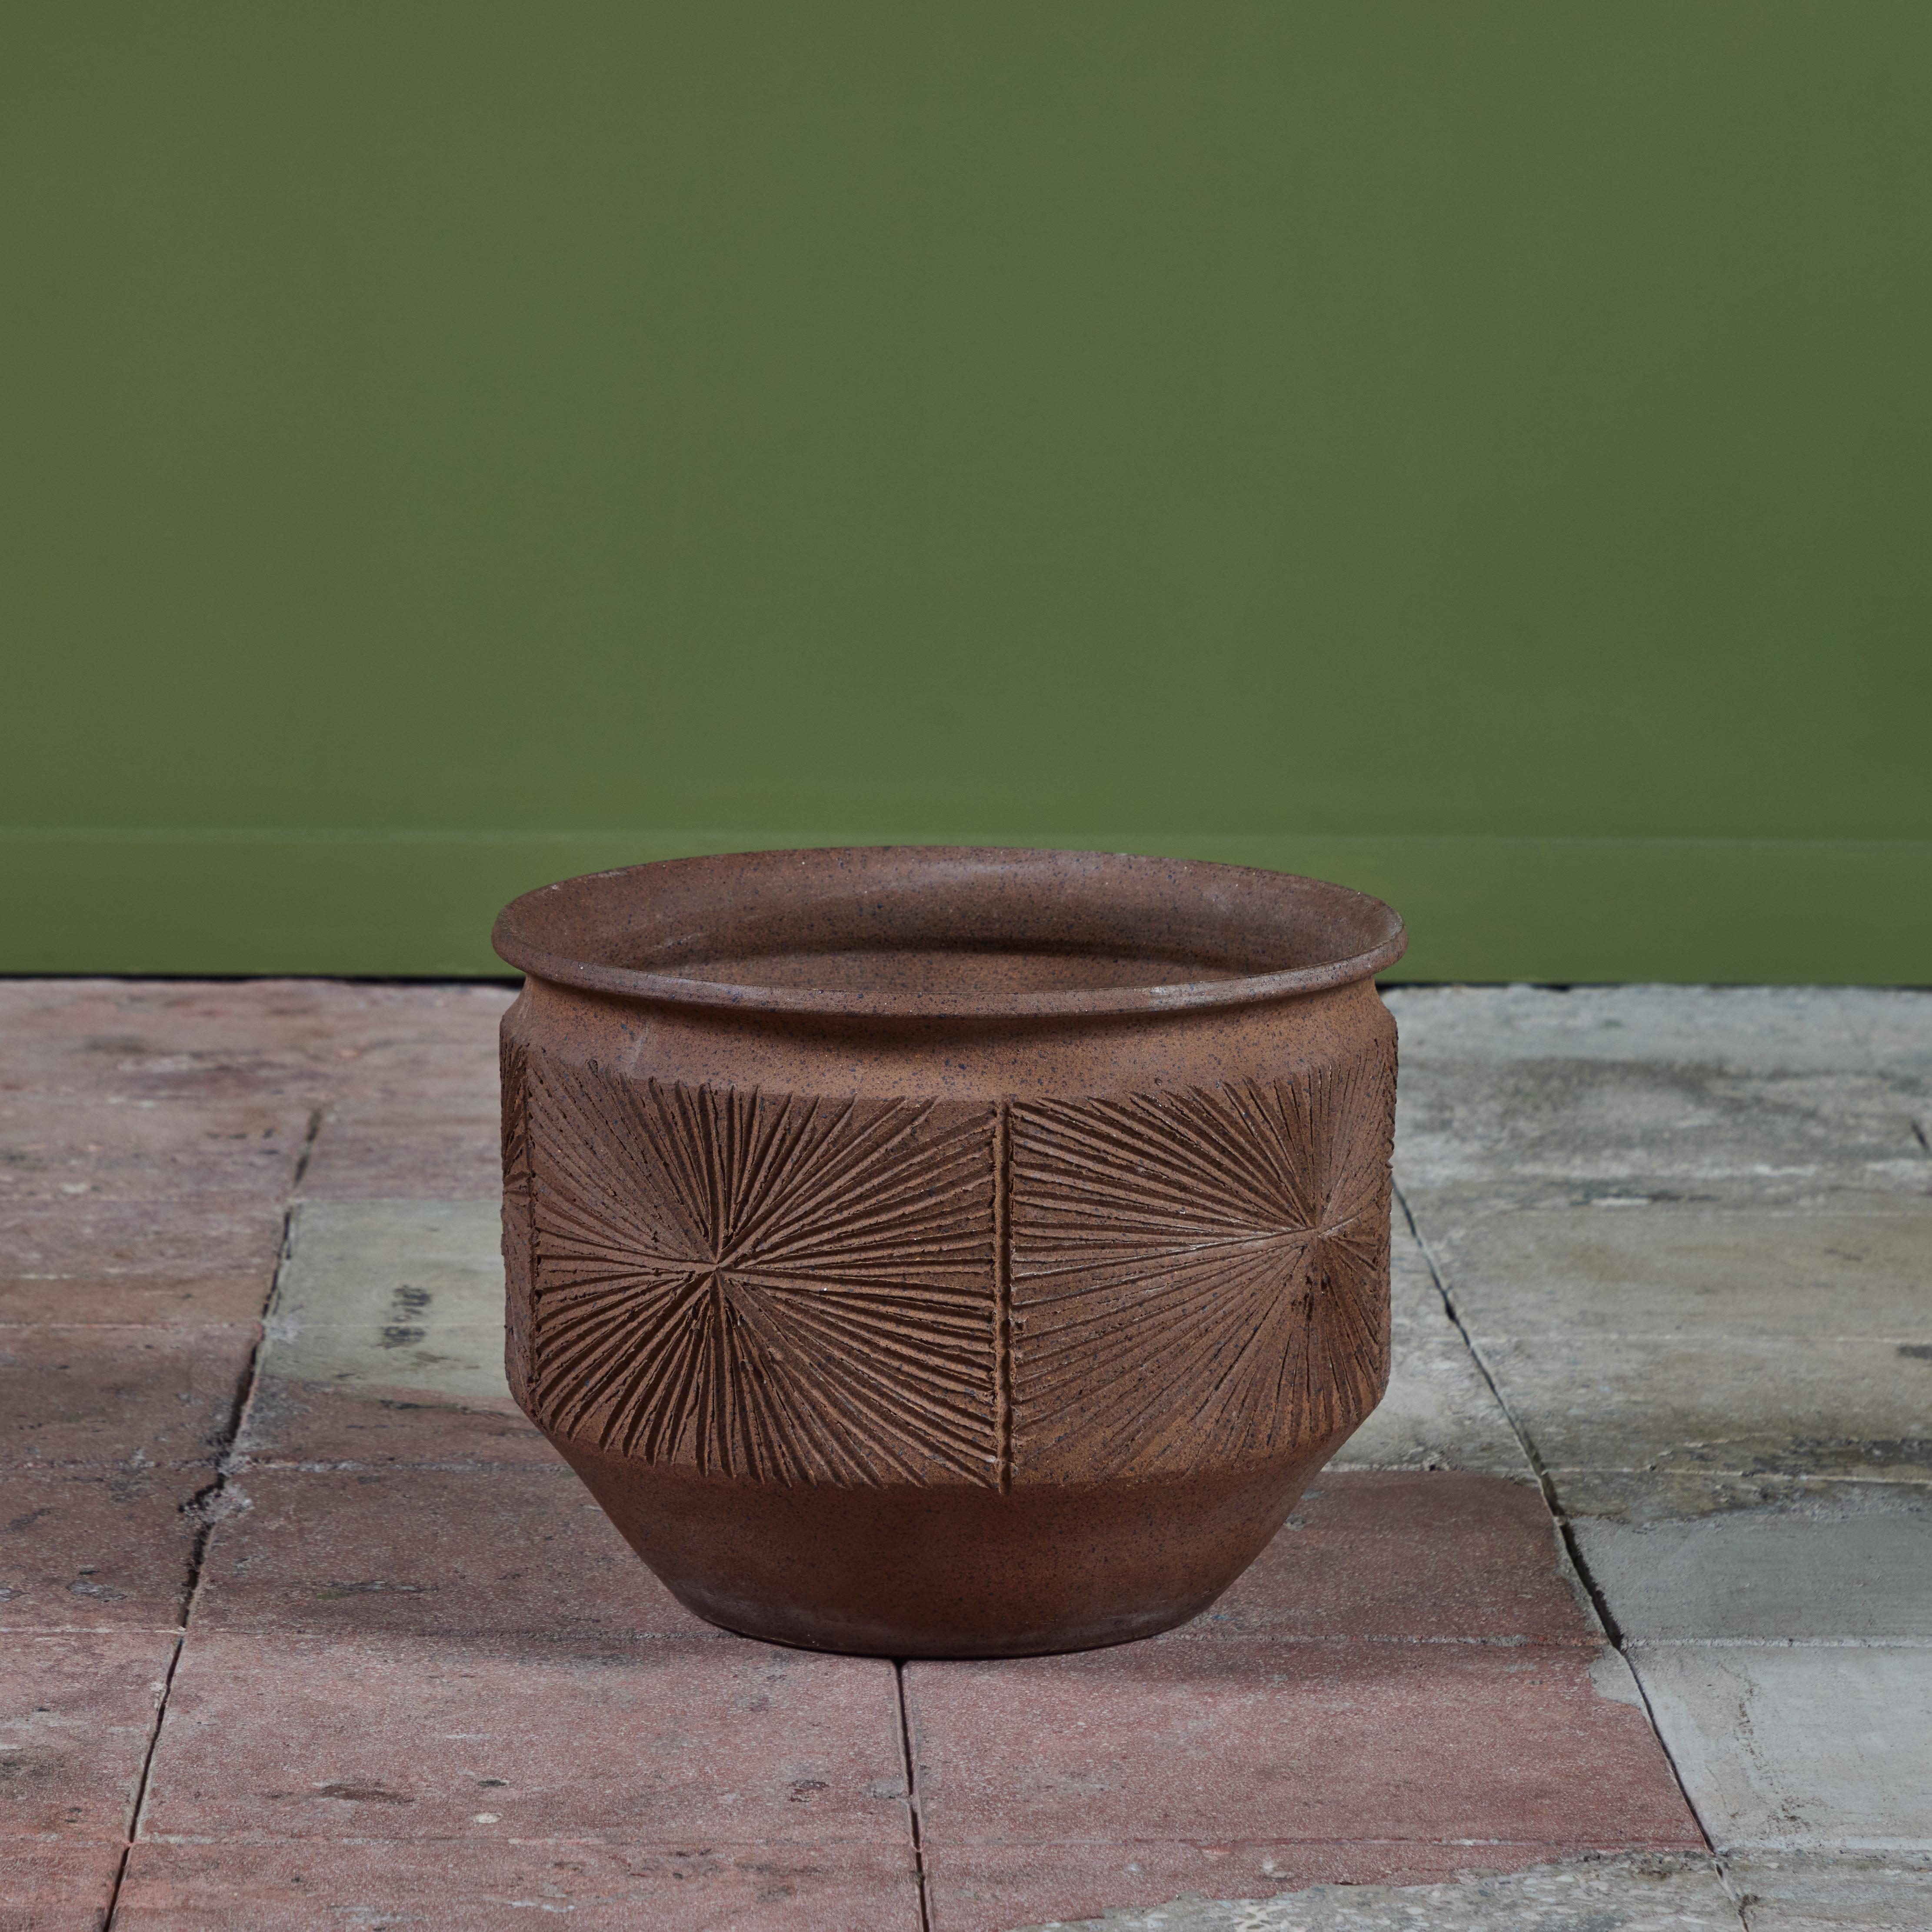 David Cressey & Robert Maxwell Stoneware “Sunburst” Bowl Planter for Earthgender In Excellent Condition For Sale In Los Angeles, CA